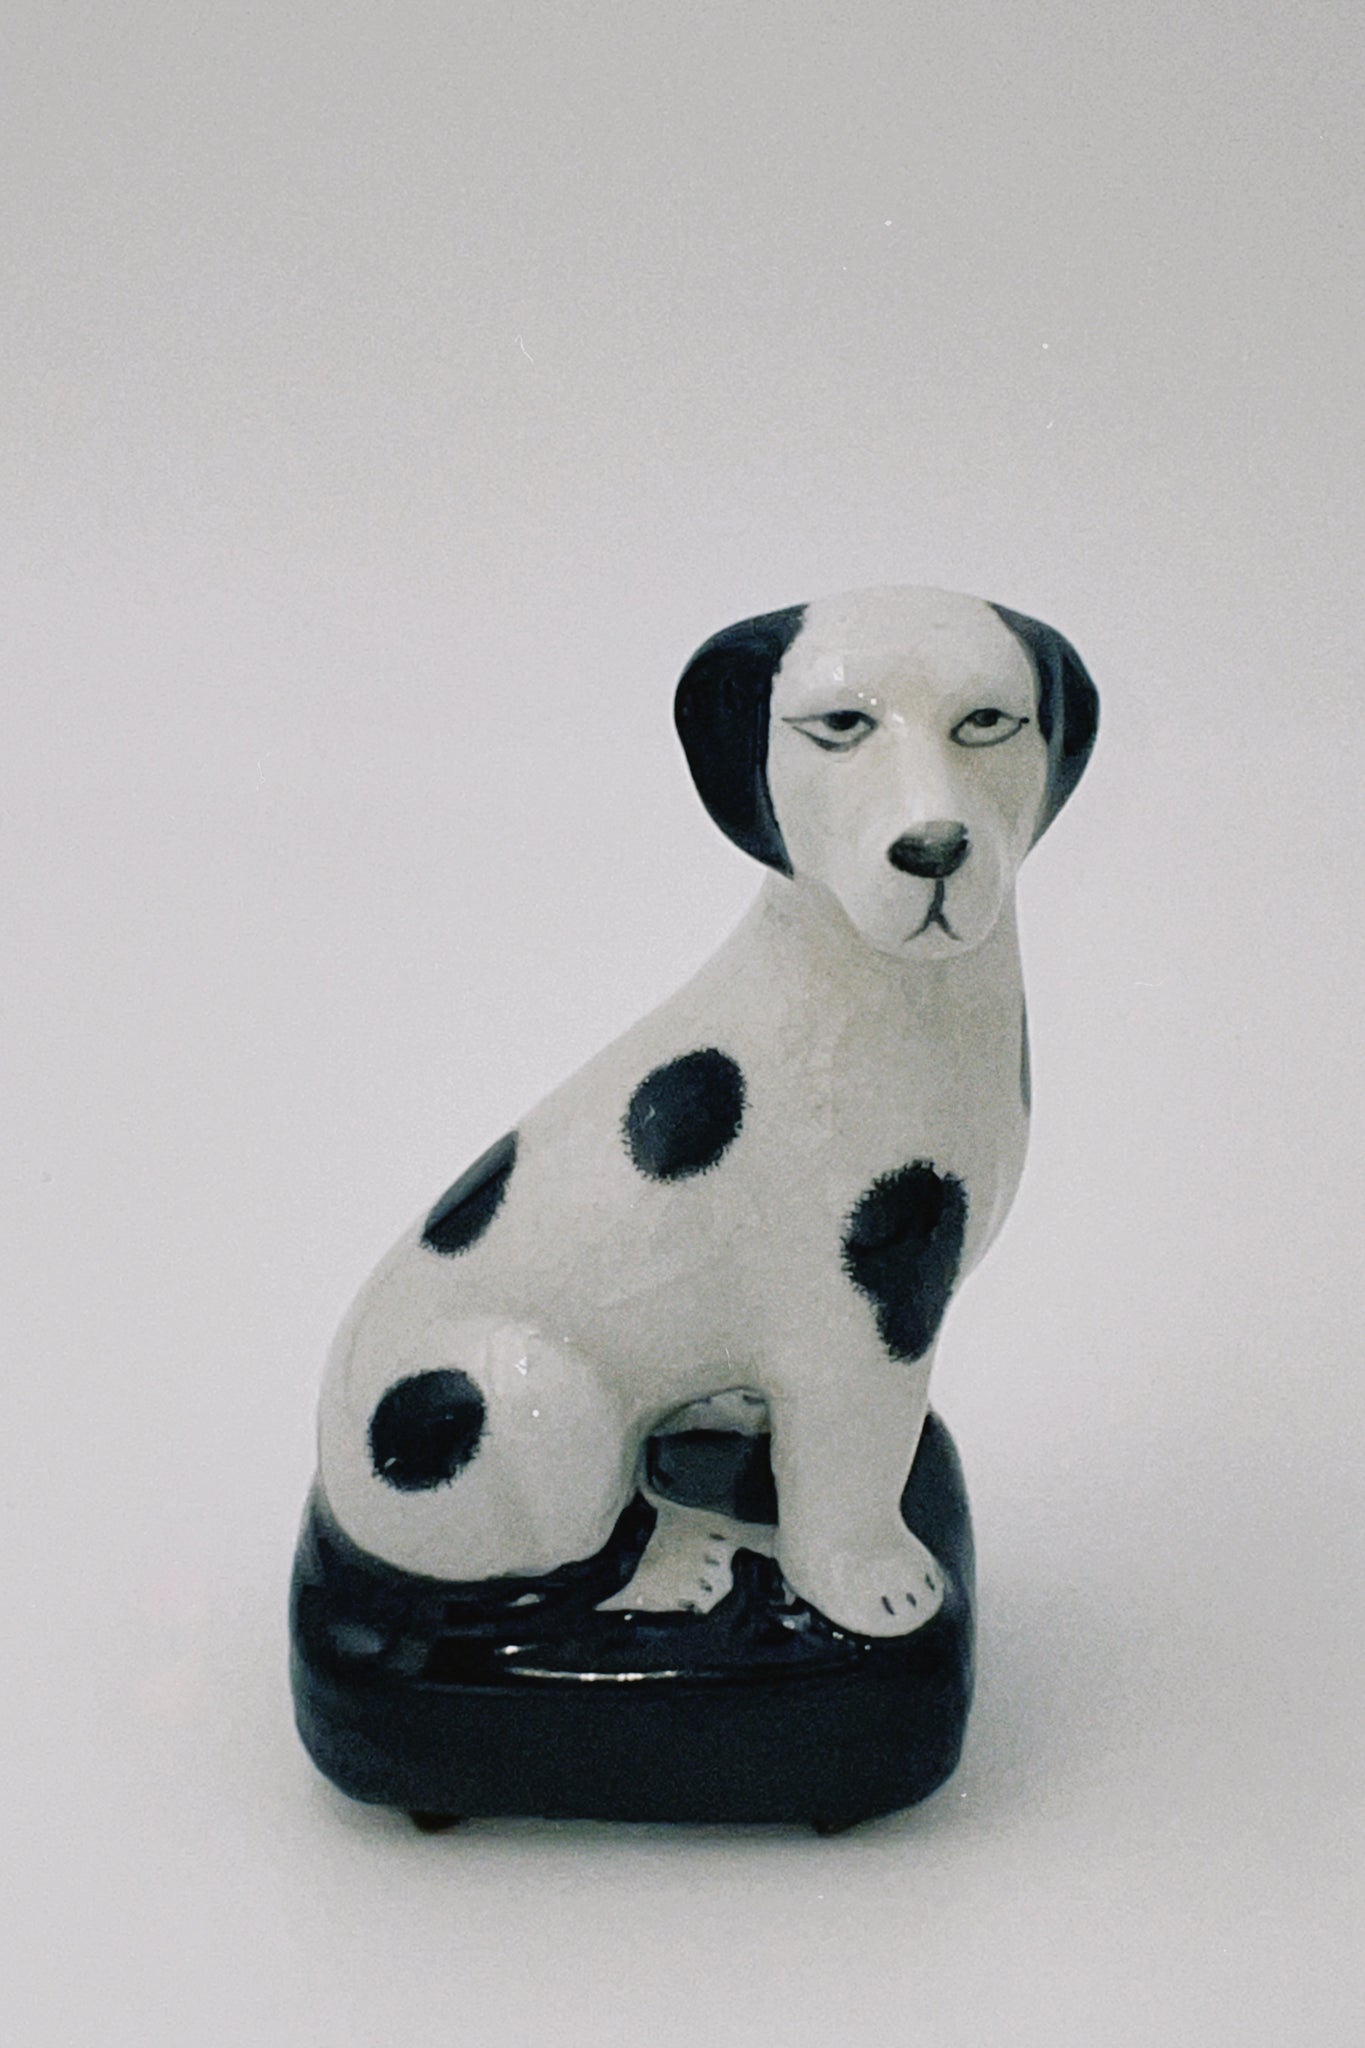 Hand painted set of Ceramic Dogs in Black and White